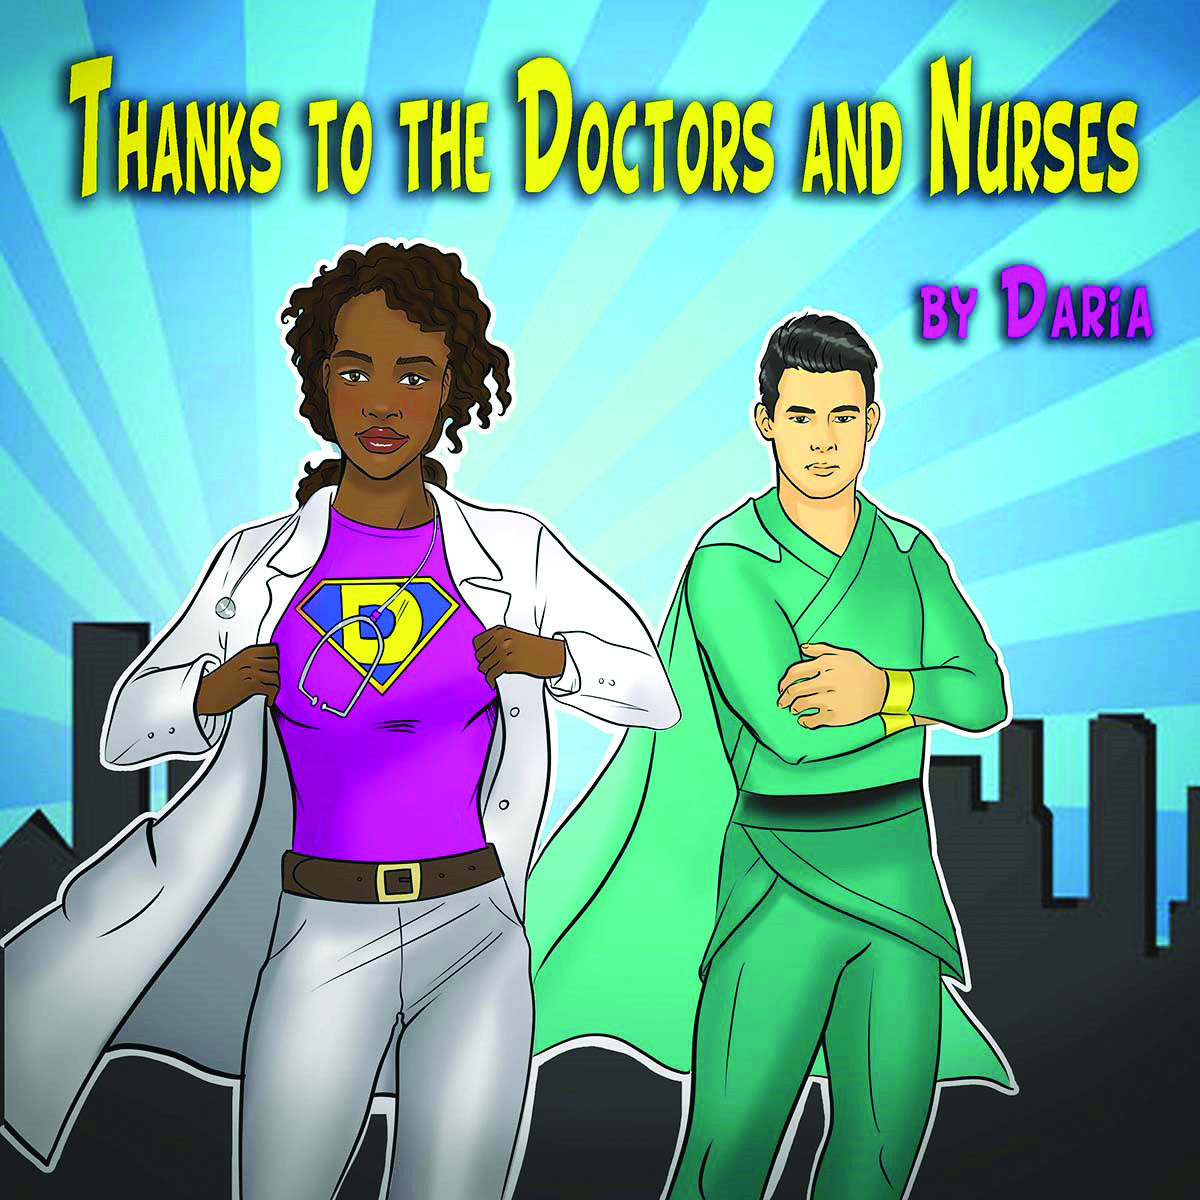 The cover of Daria’s recording in tribute to health care workers.